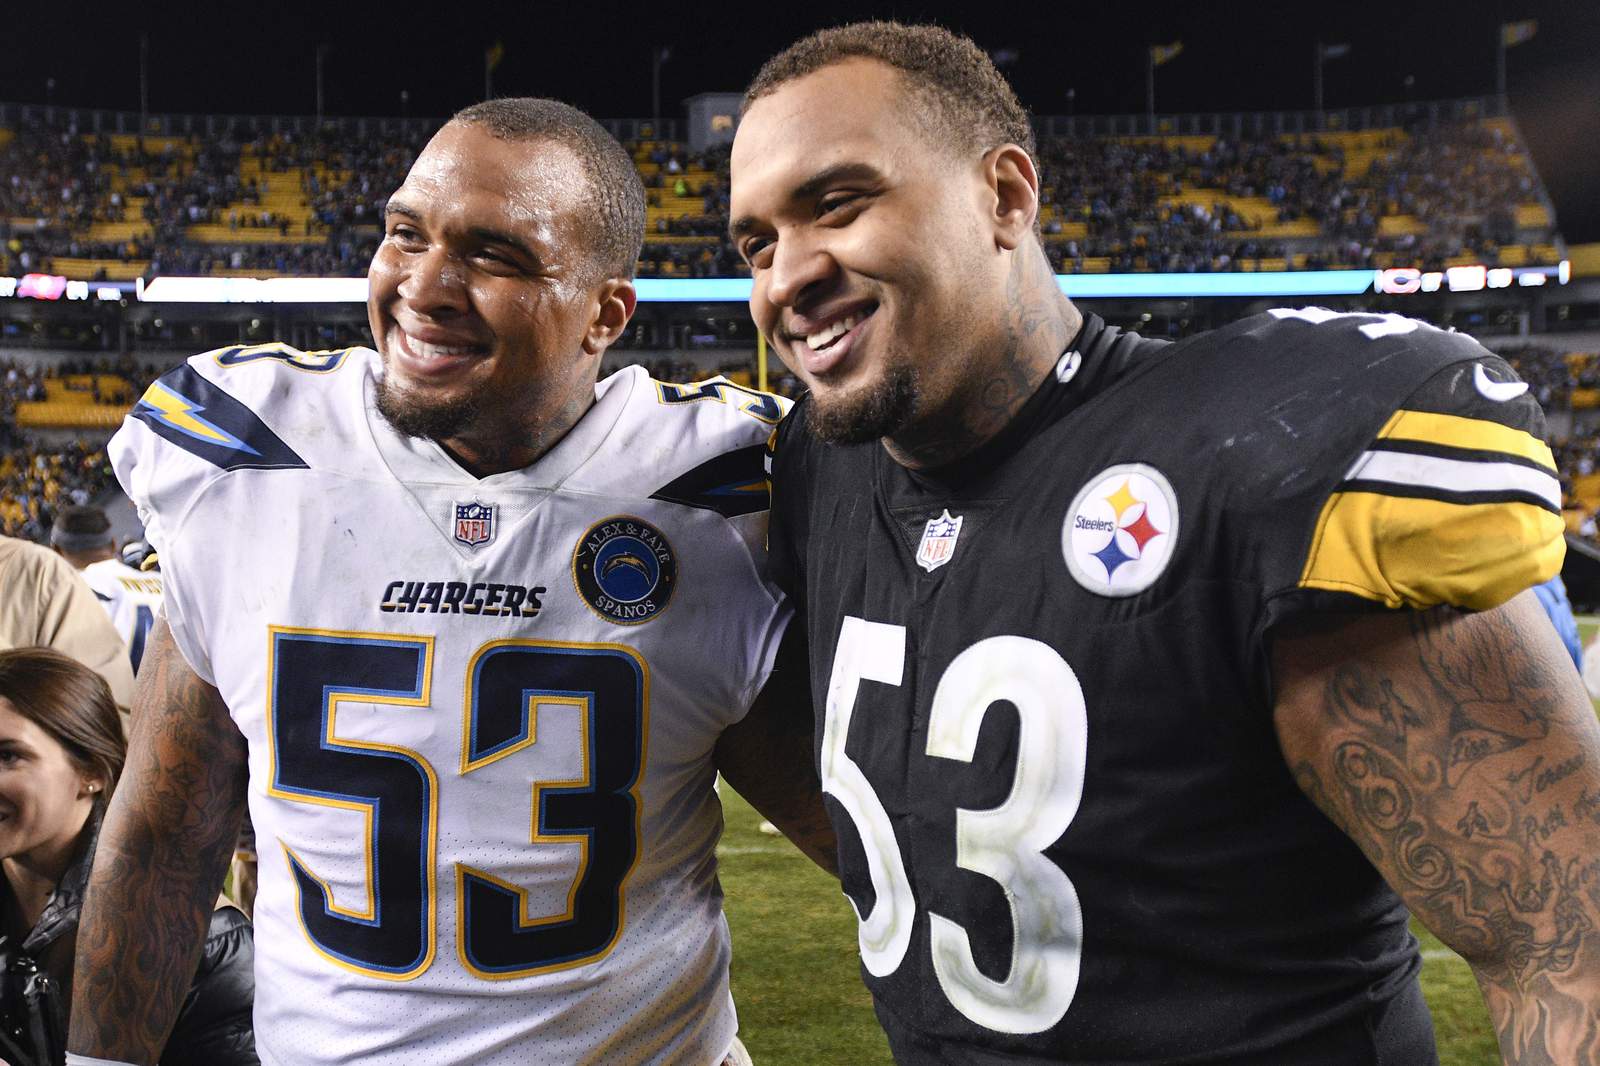 Twin brothers Mike and Maurkice Pouncey retire from NFL